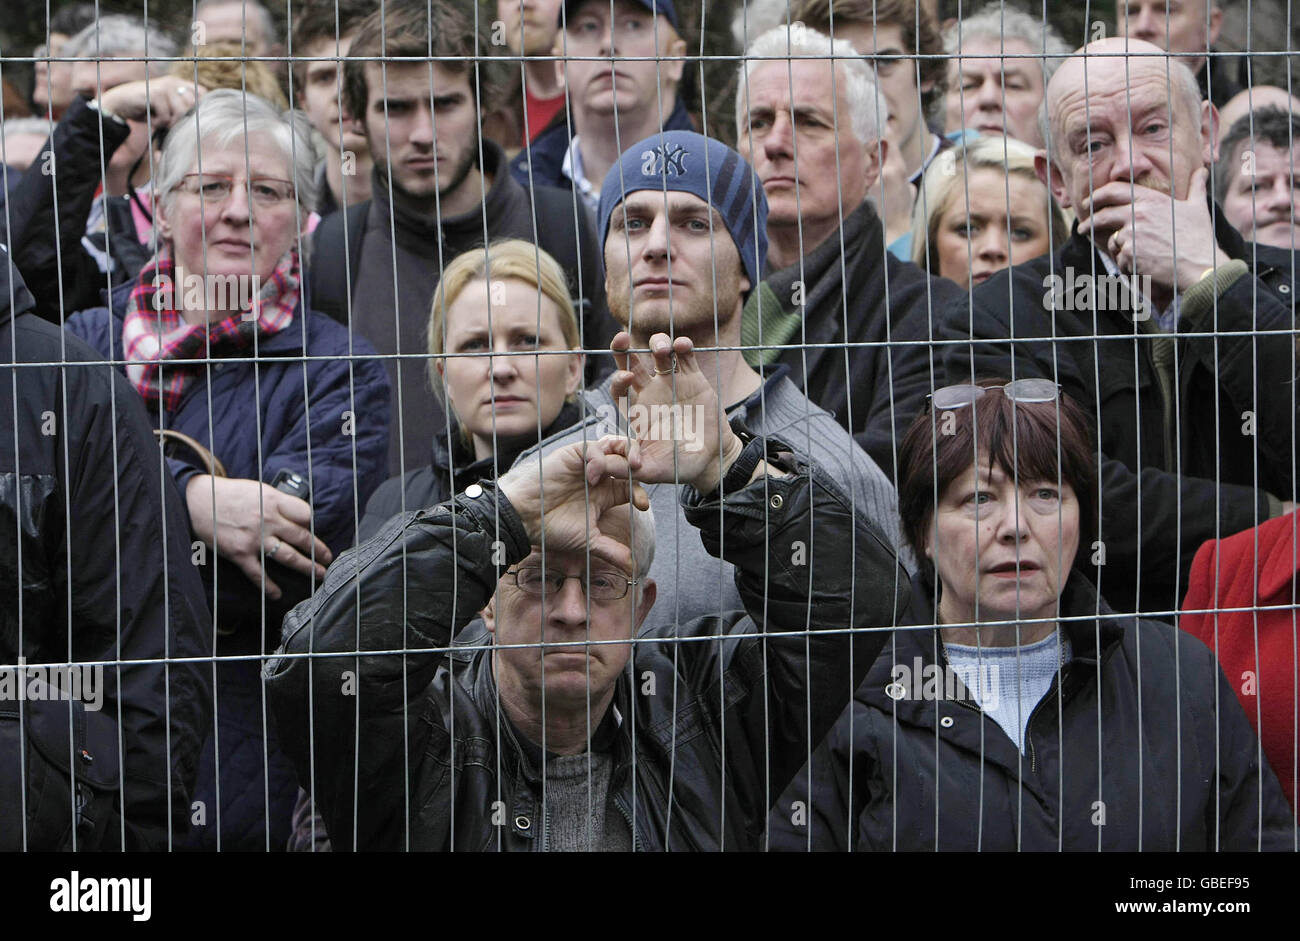 Public sector workers listen to union leaders speaking at a massive protest on the streets of Dublin today to demonstrate over the Government's handling of the recession. Stock Photo